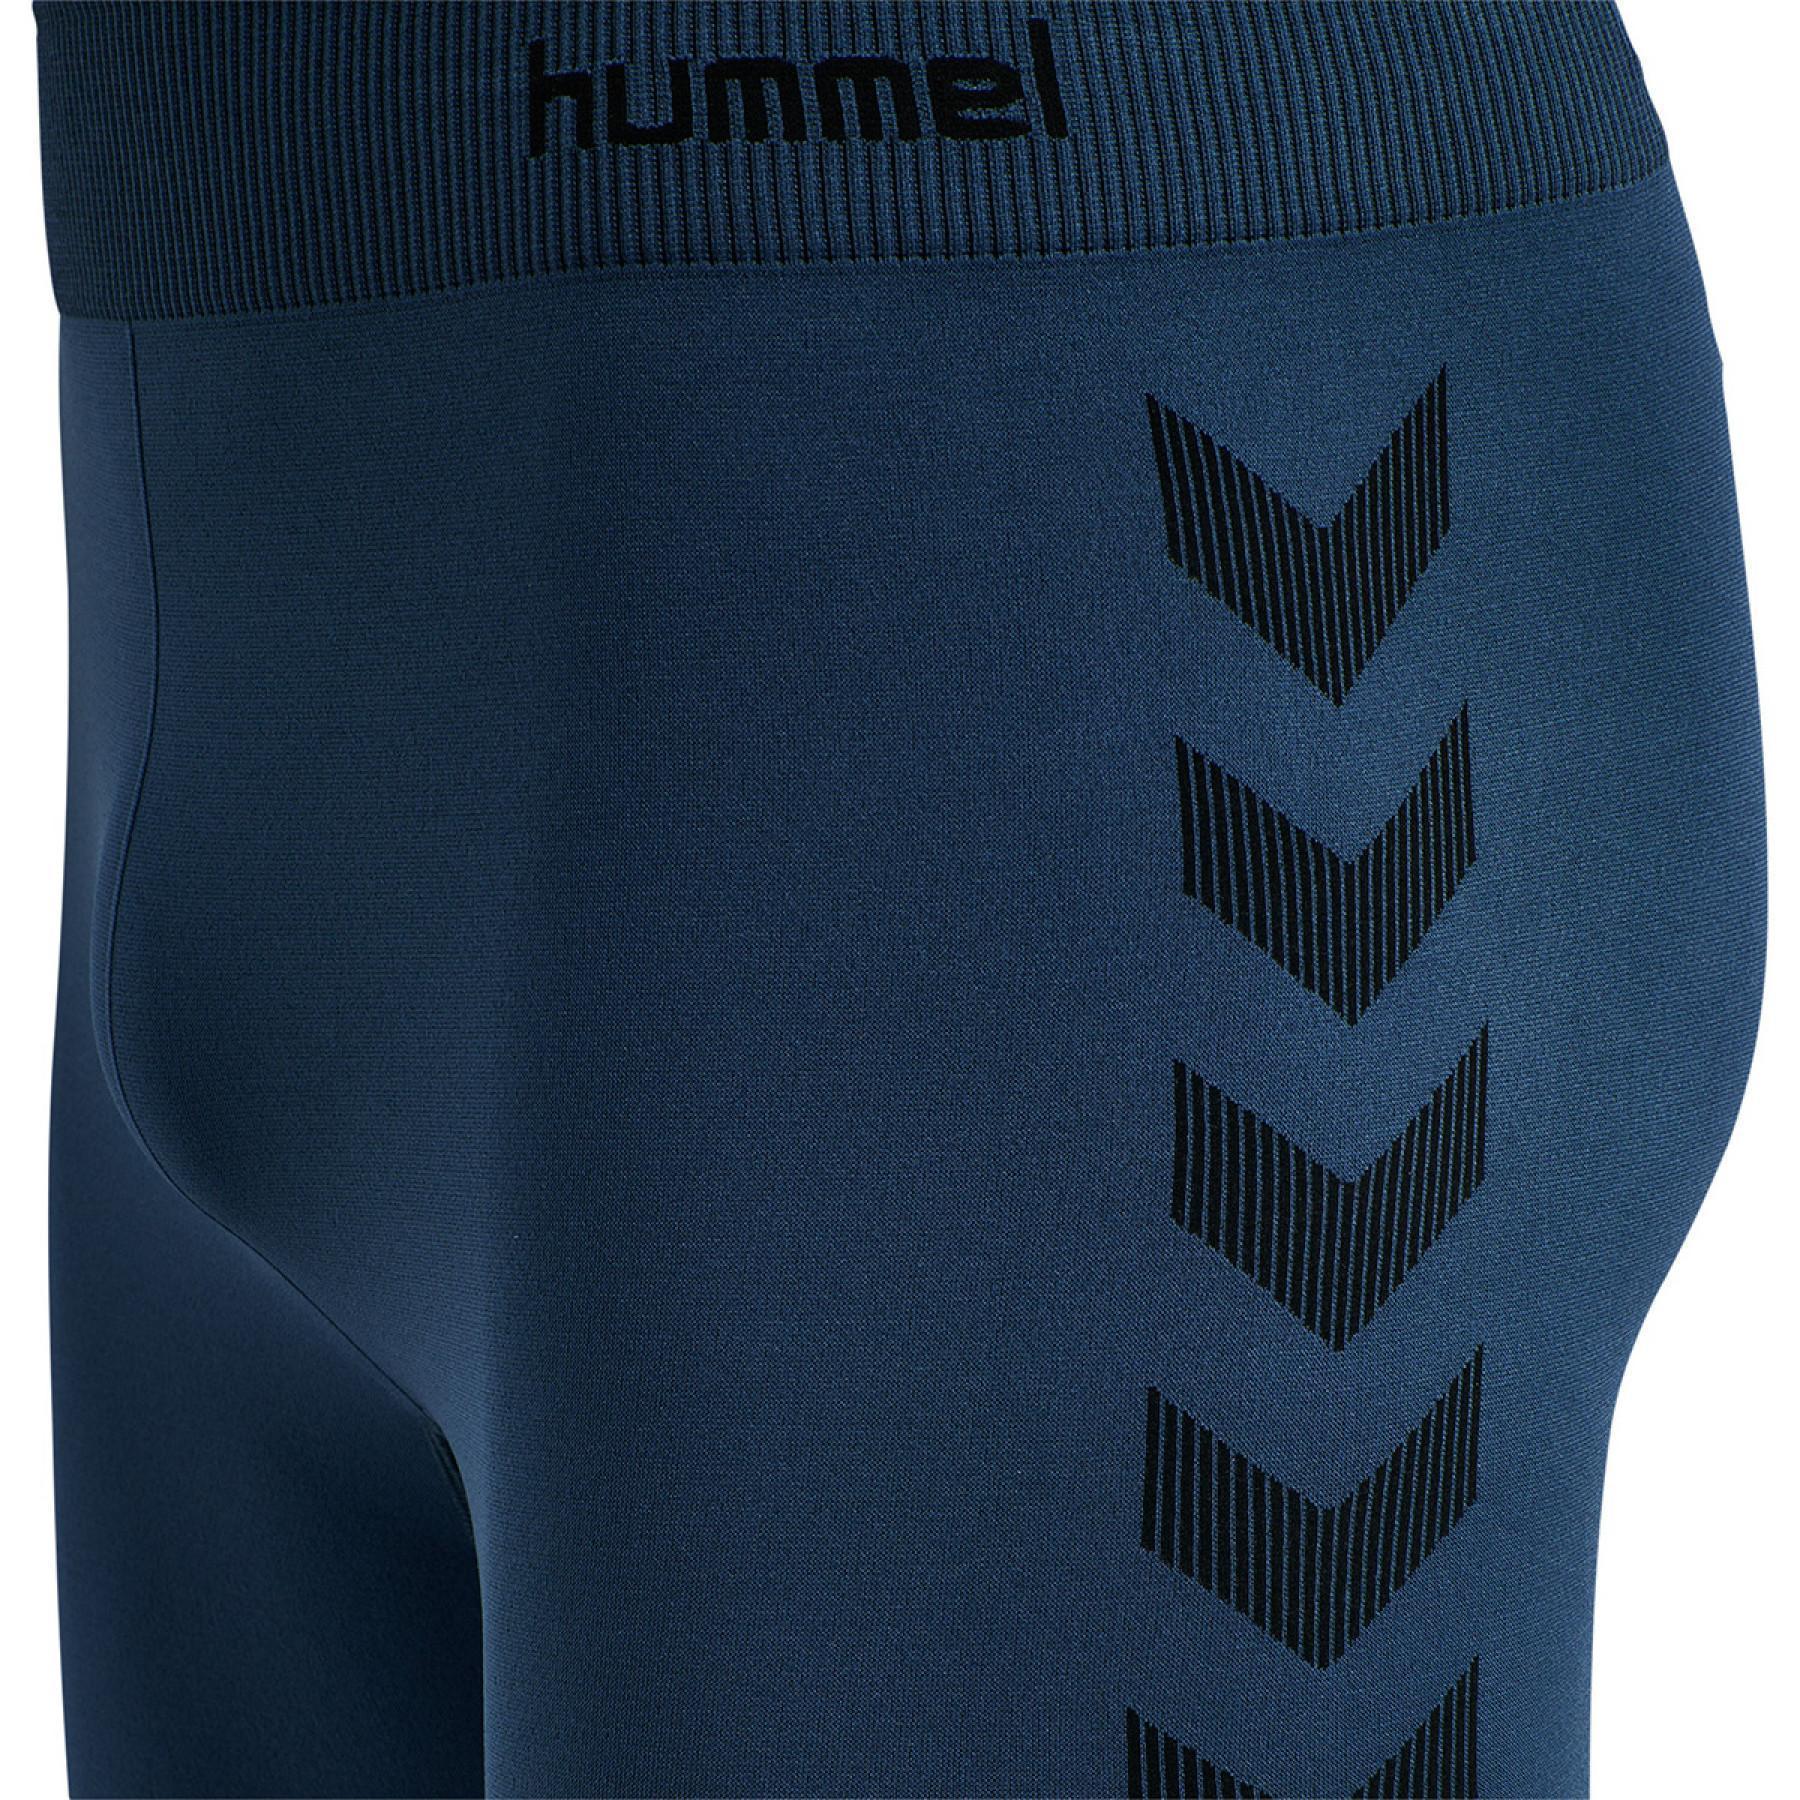 HUMMEL - FIRST SEAMLESS TRAINING TIGHTS Size XS/S